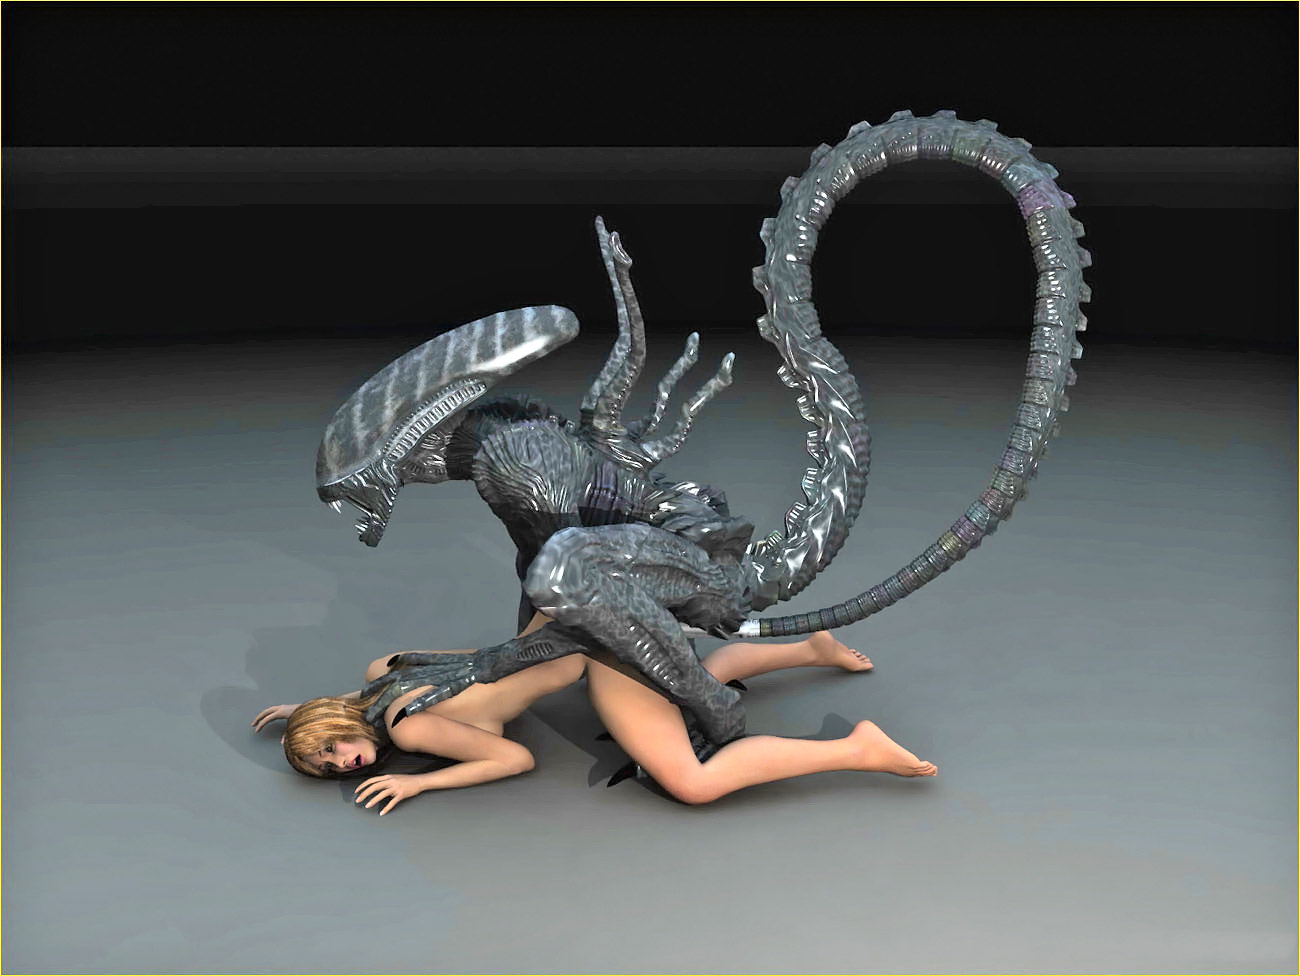 Really hot animated gif xxx and more best pics of monster fuck | Porncraft  3d